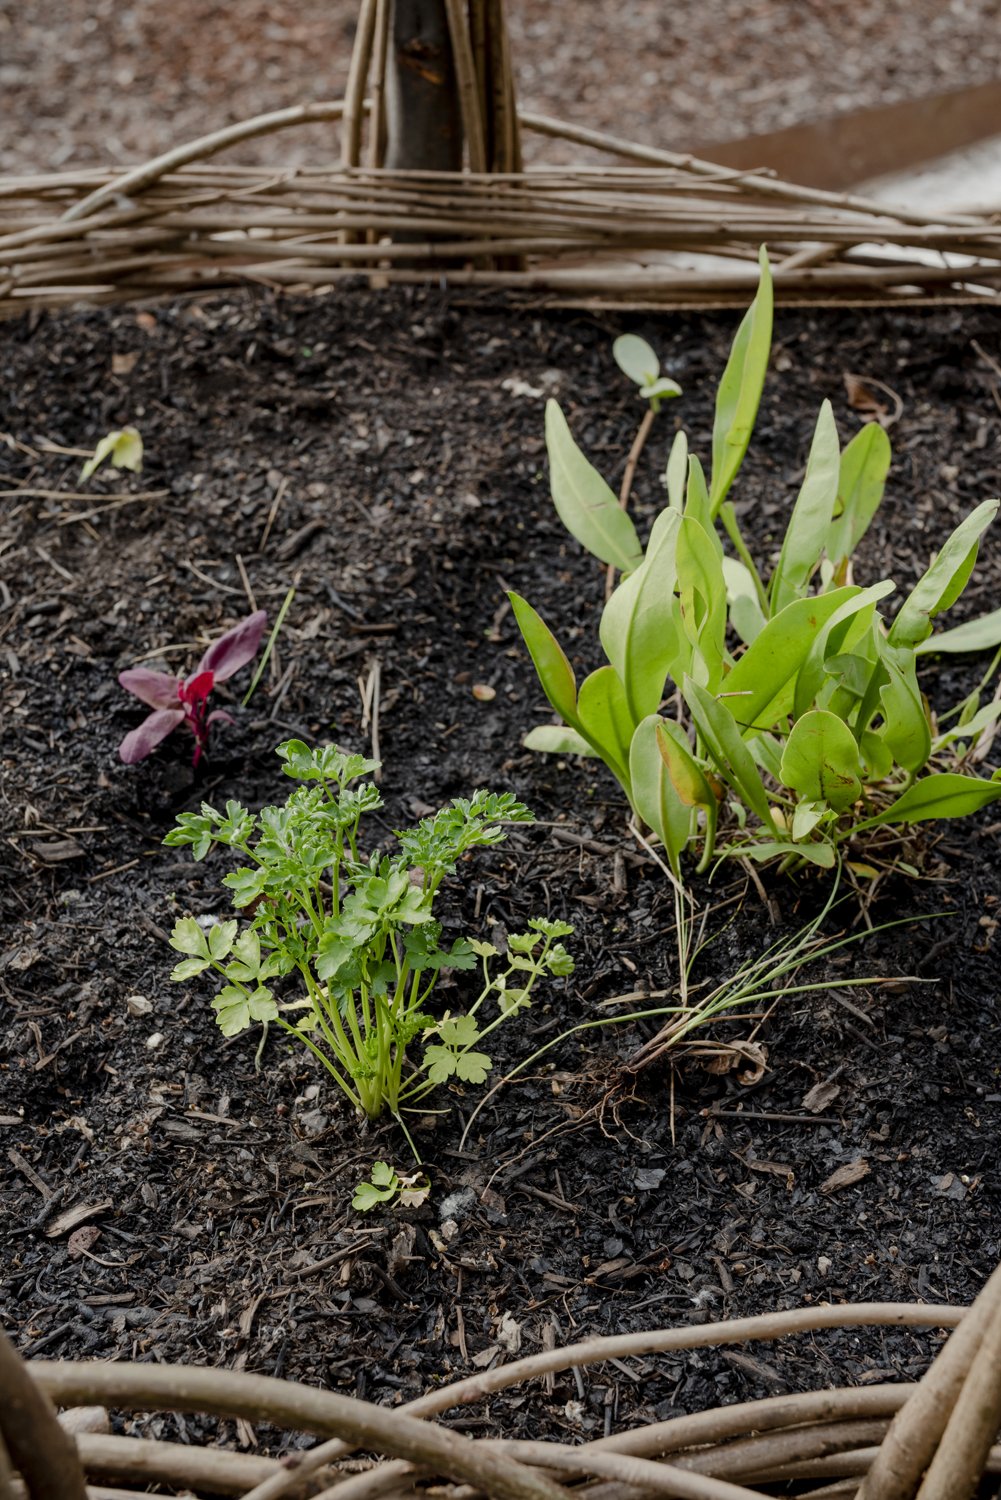  Detail of edible plants-wild Bietola, Parsley and Red Orache newly planted, April 2022 